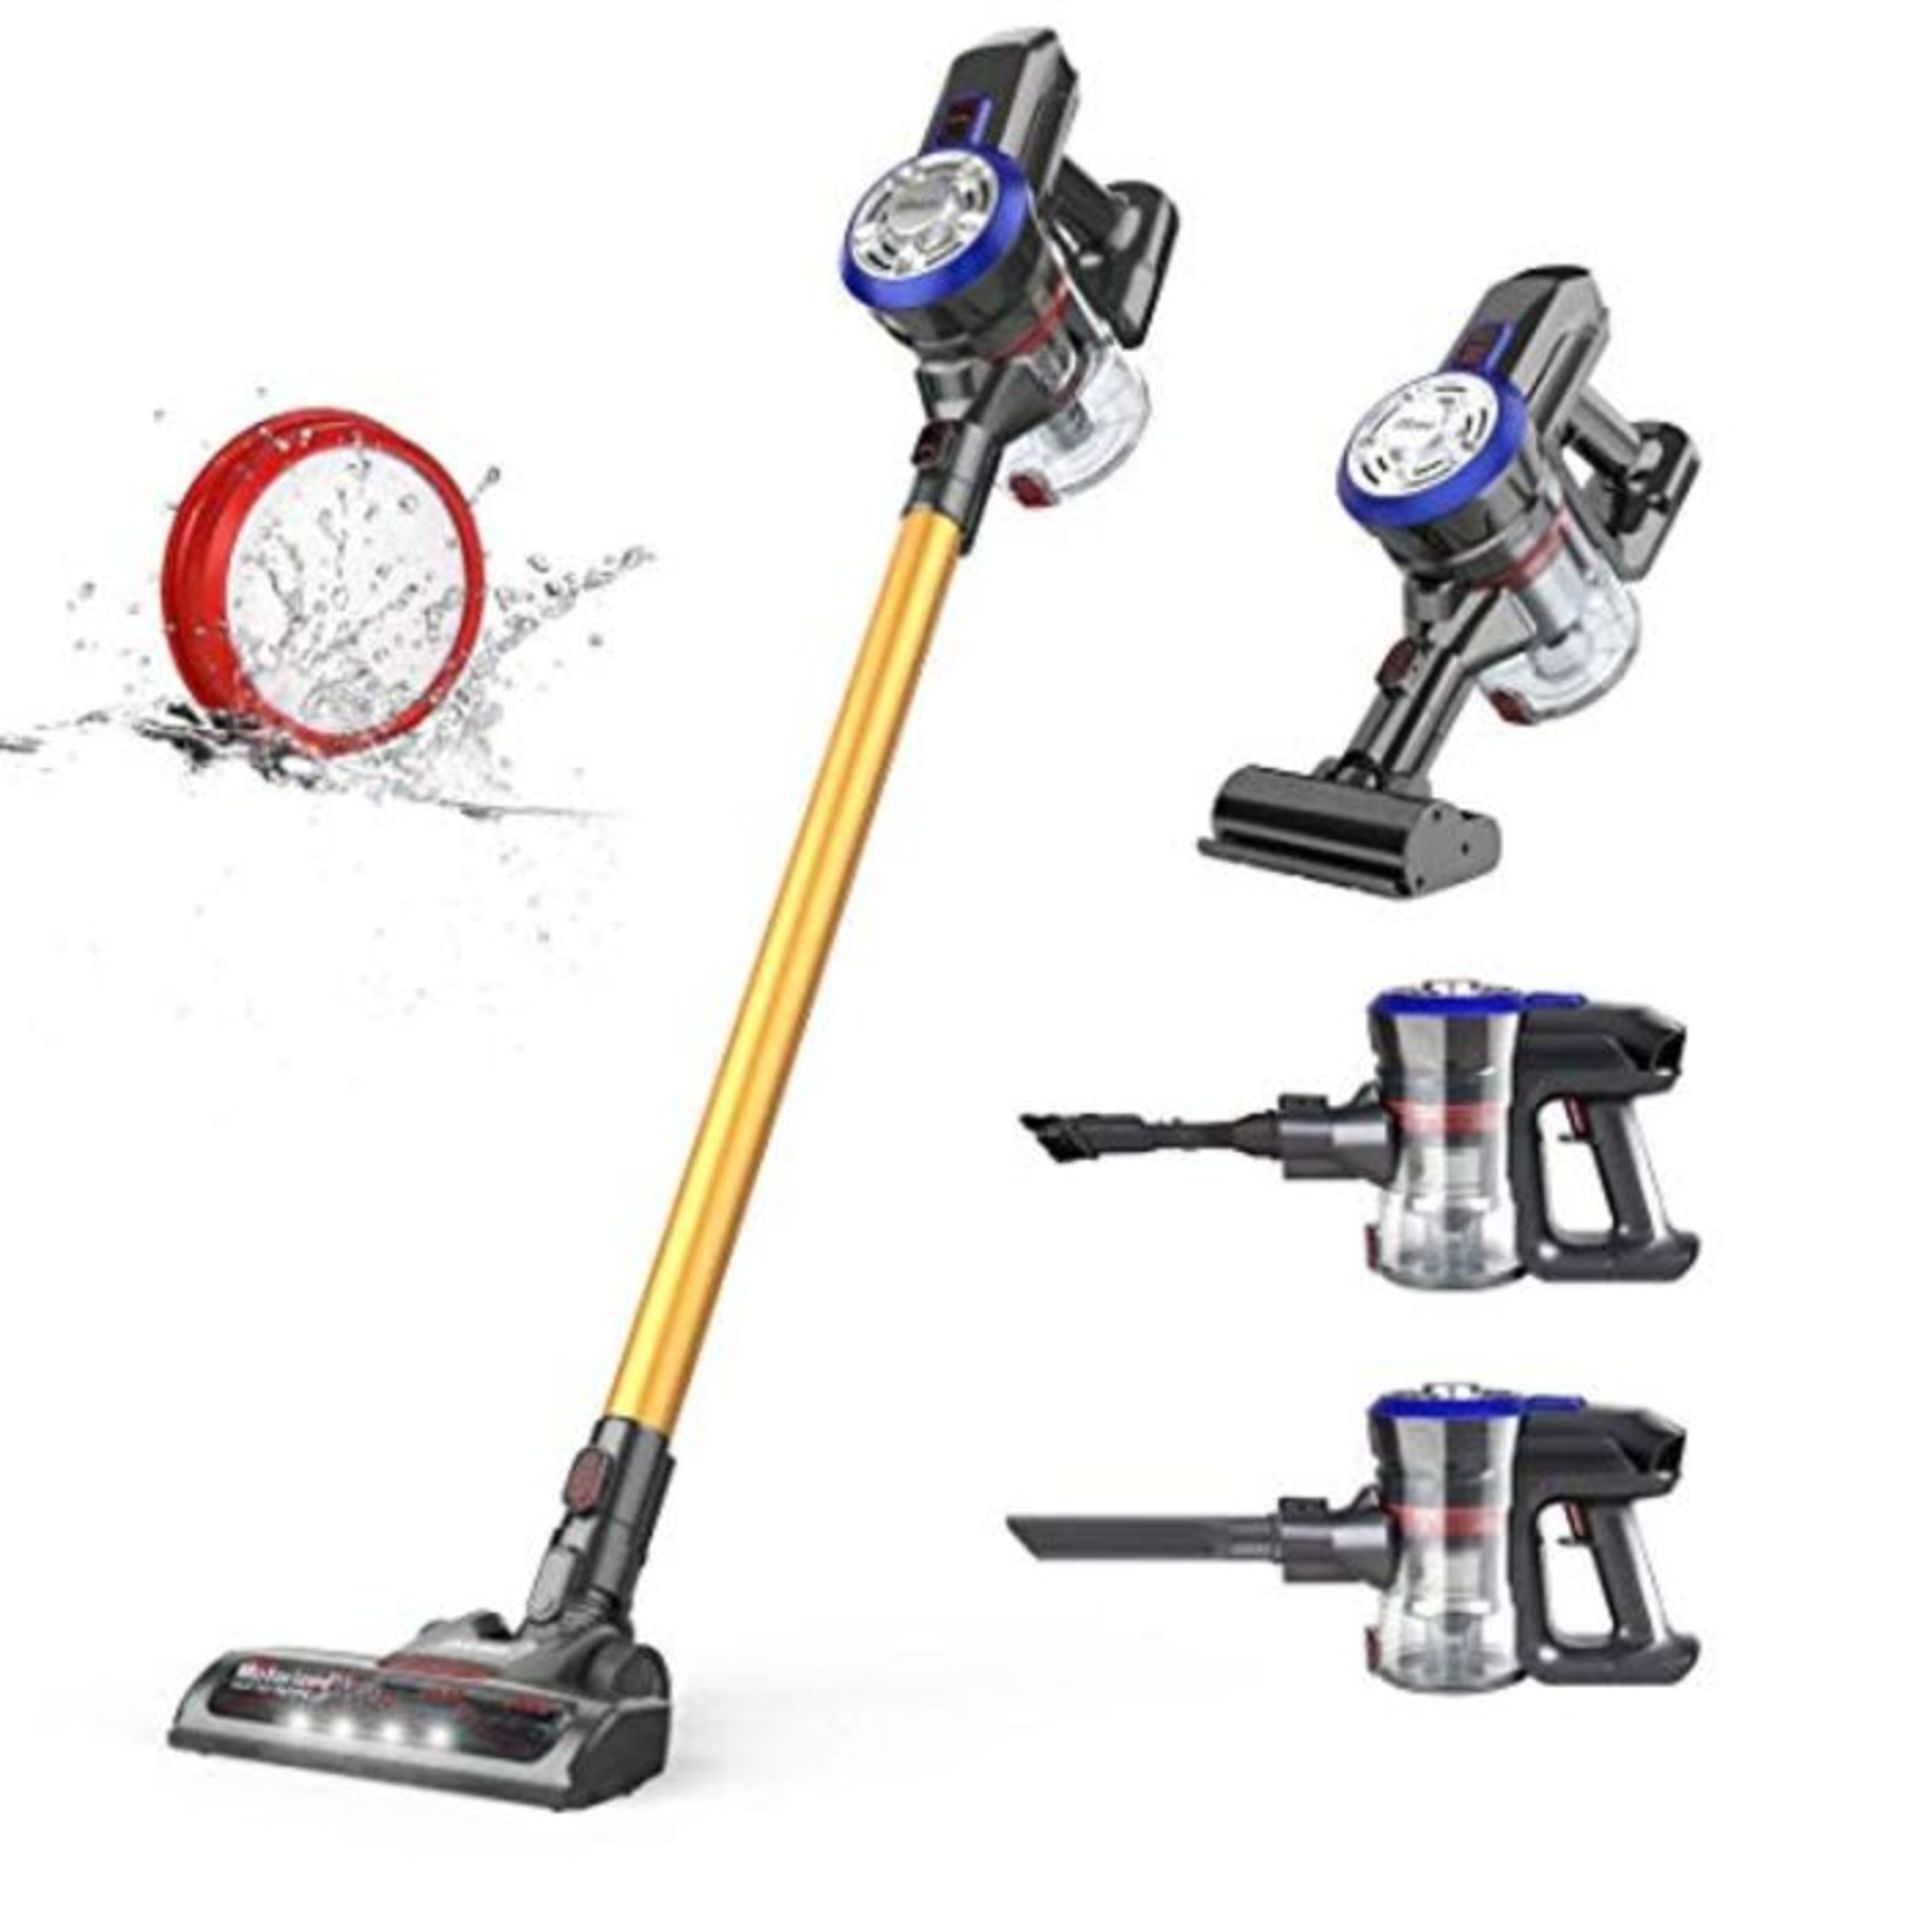 dibea Cordless Vacuum Cleaner 4-in-1,Stick Handheld Lightweight Vacuum with Removable